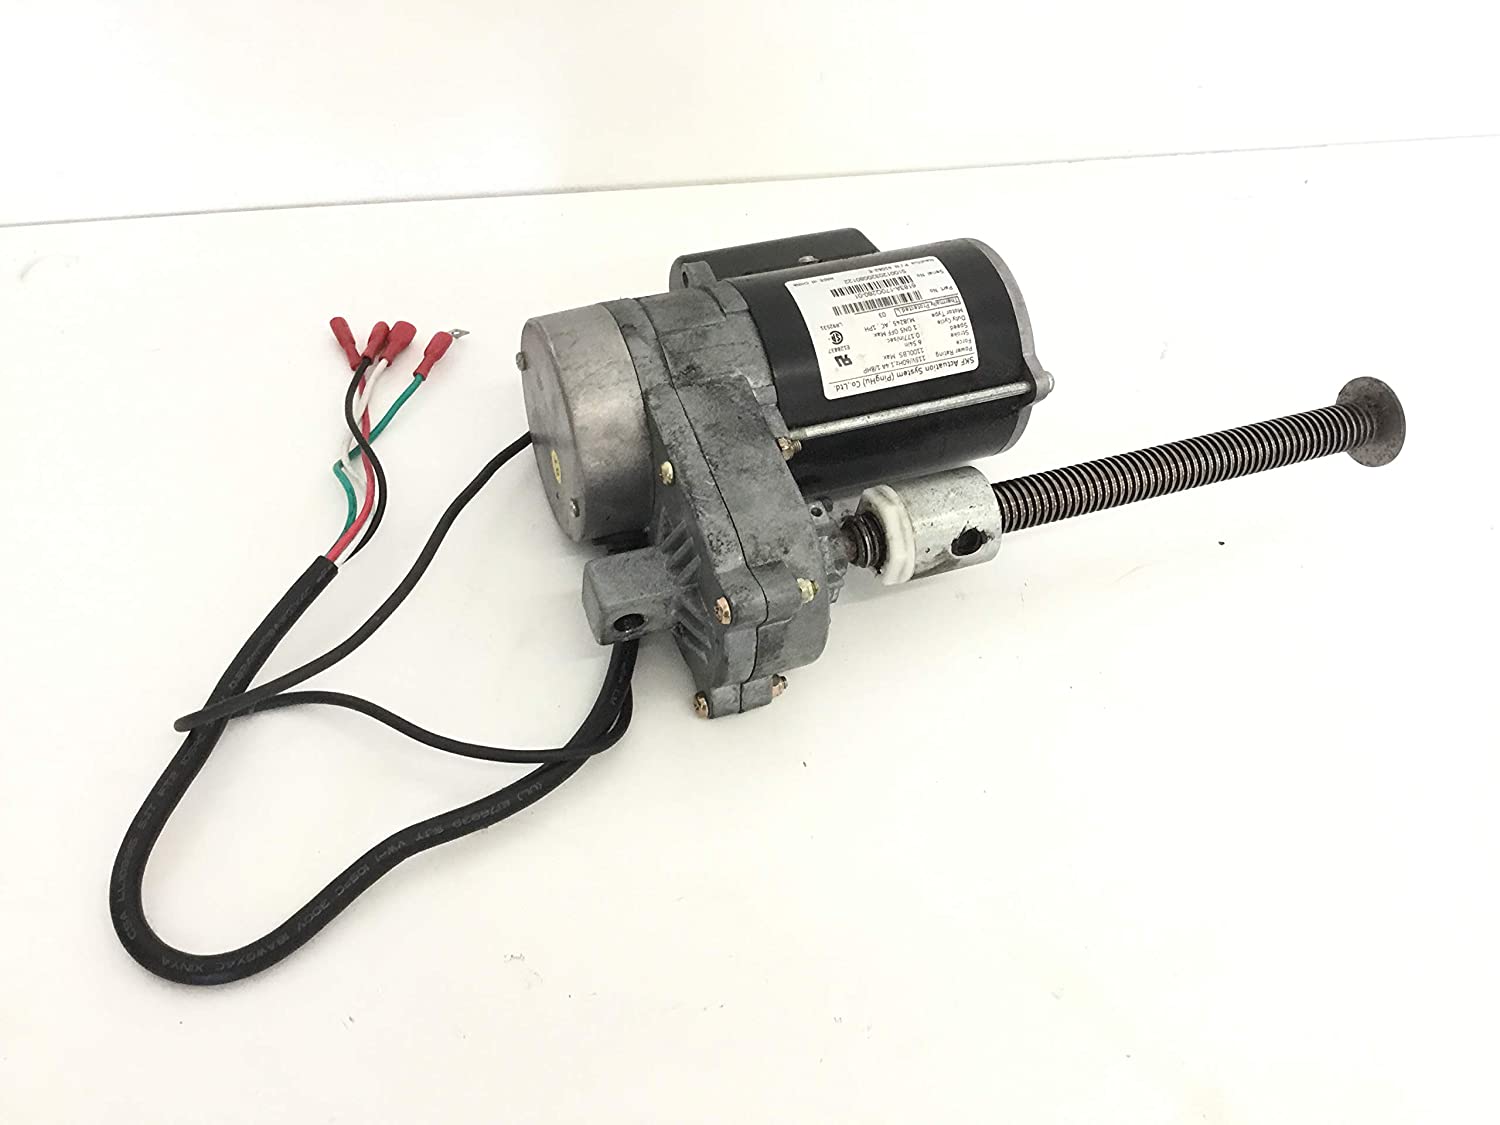 115V Incline Motor Actuator MJ8245 6183A-170Q280-01 or SM41062 or 41062-C Works with Nautilus T916 Treadmill (Used)